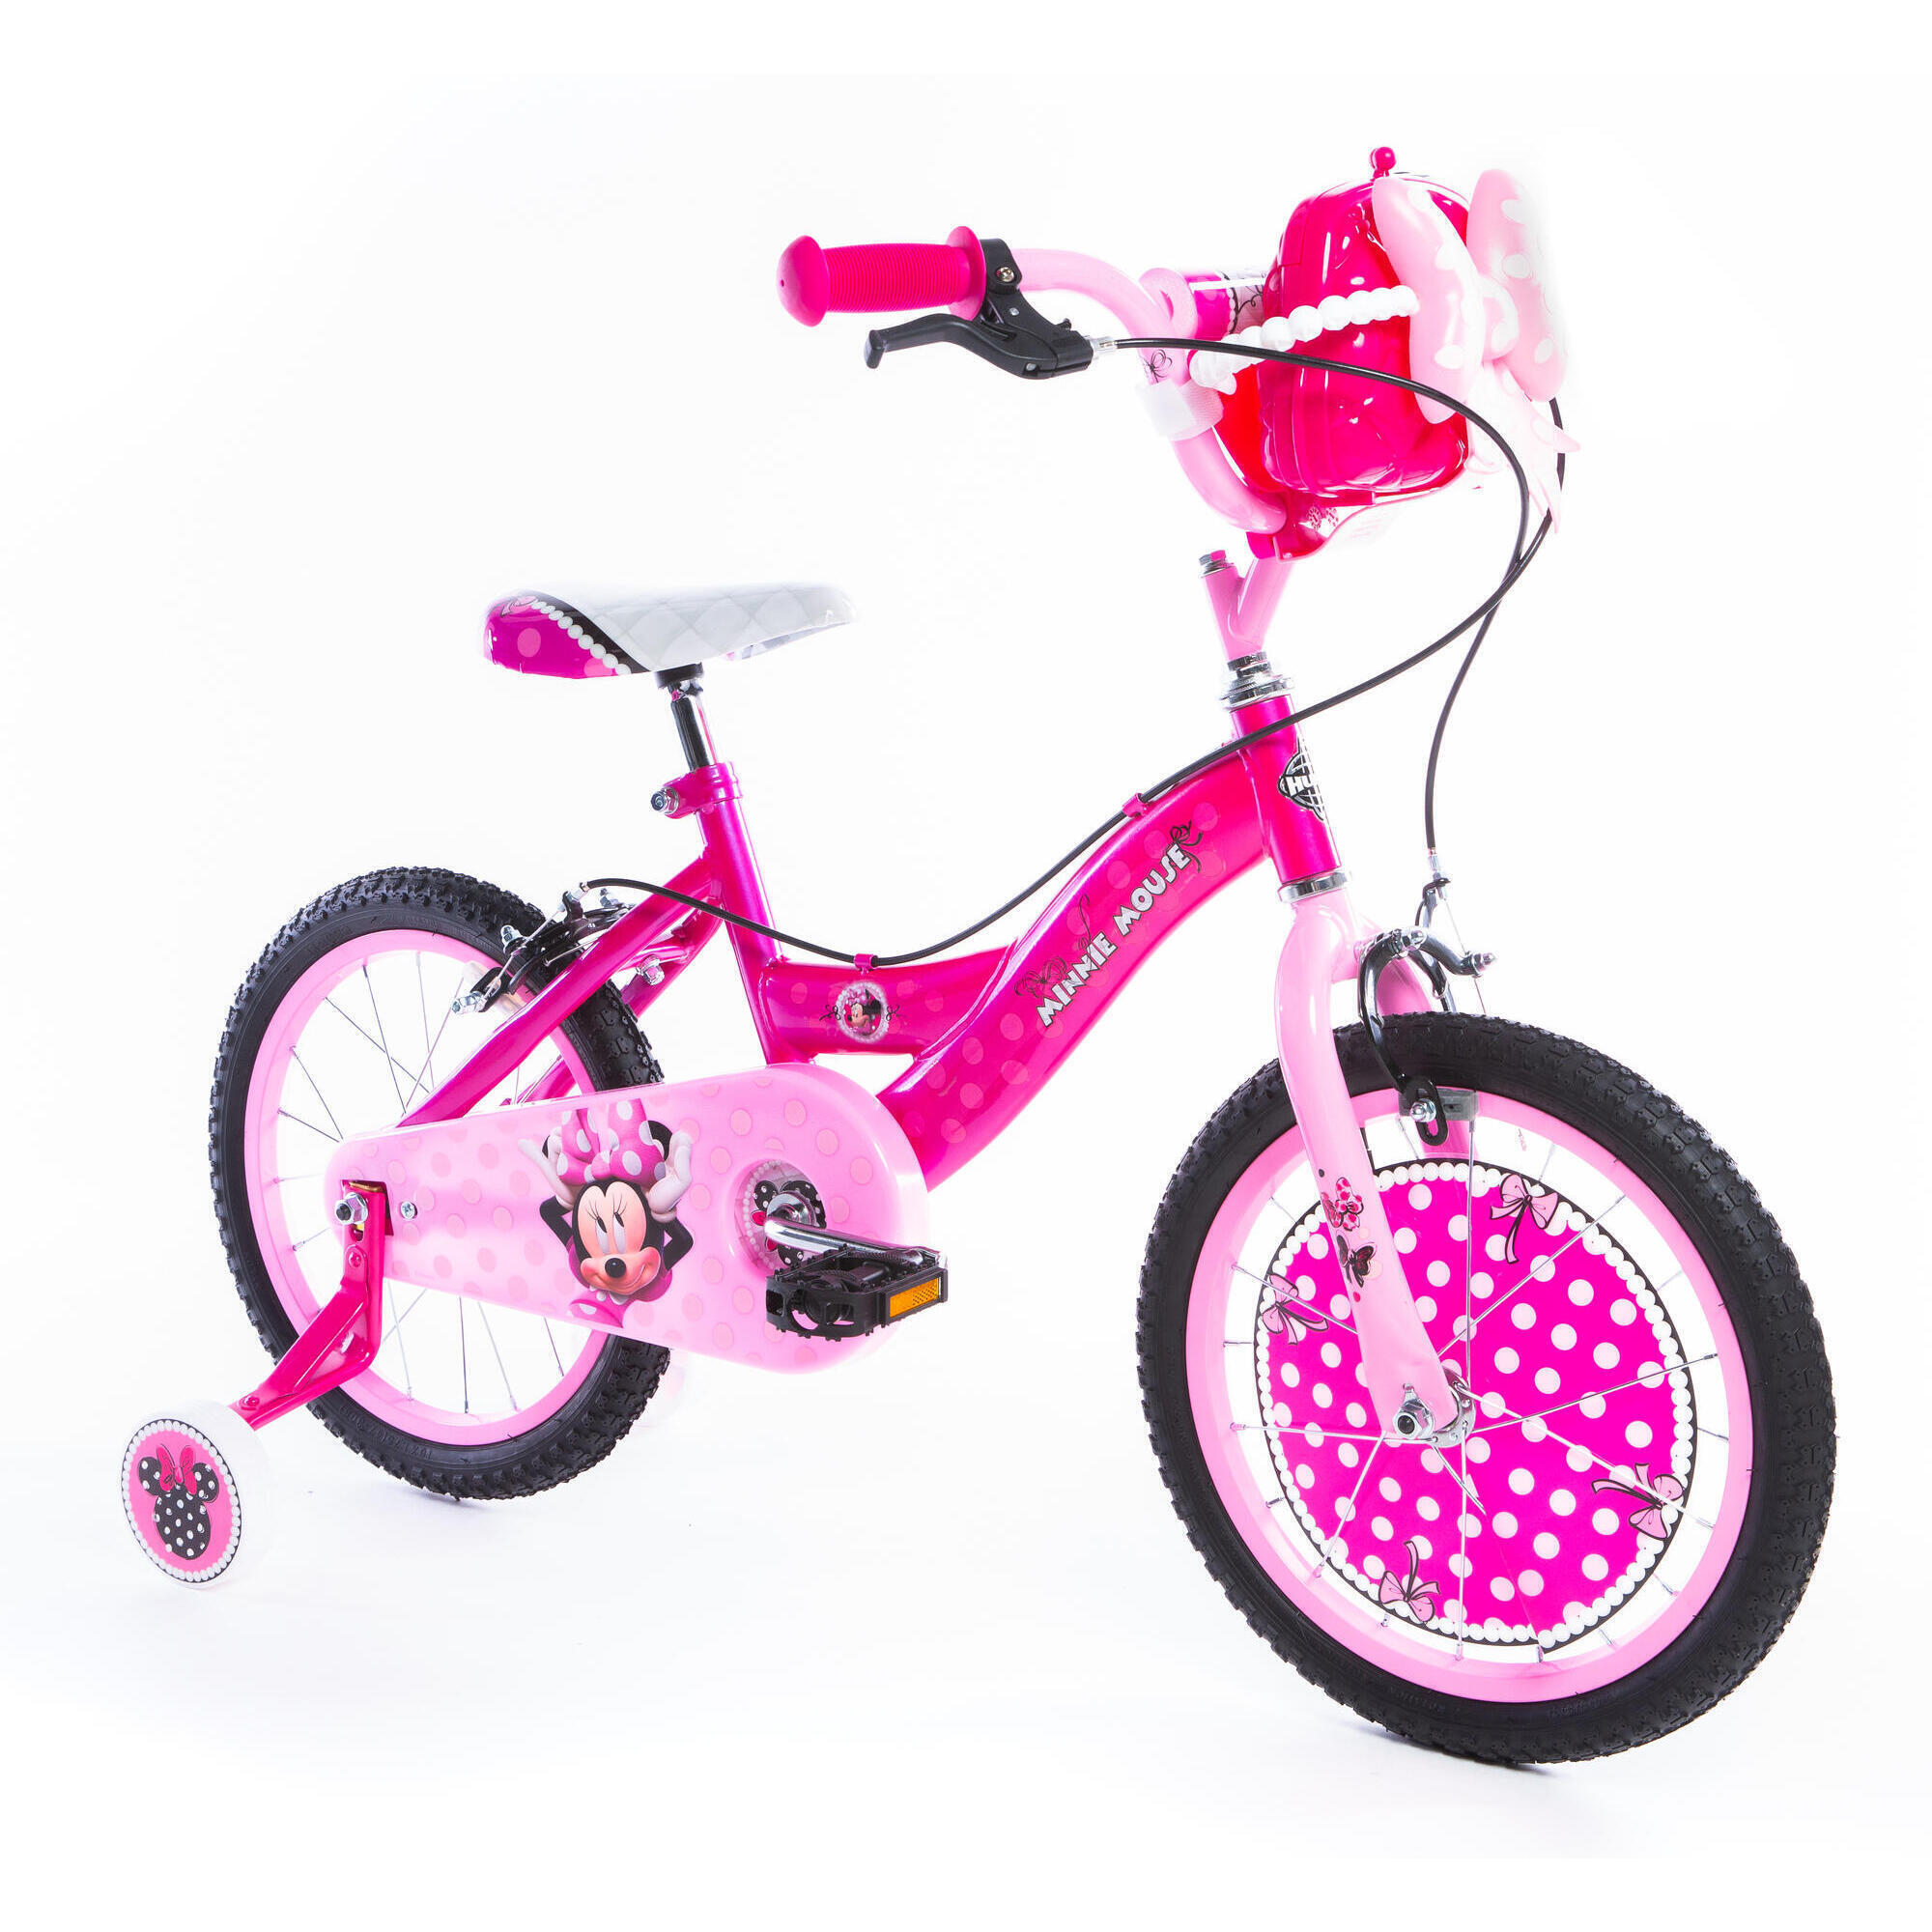 Huffy Disney Minnie Mouse Kids Bike 16 Inch Pink For 5-7 Year Old +  stabilisers HUFFY